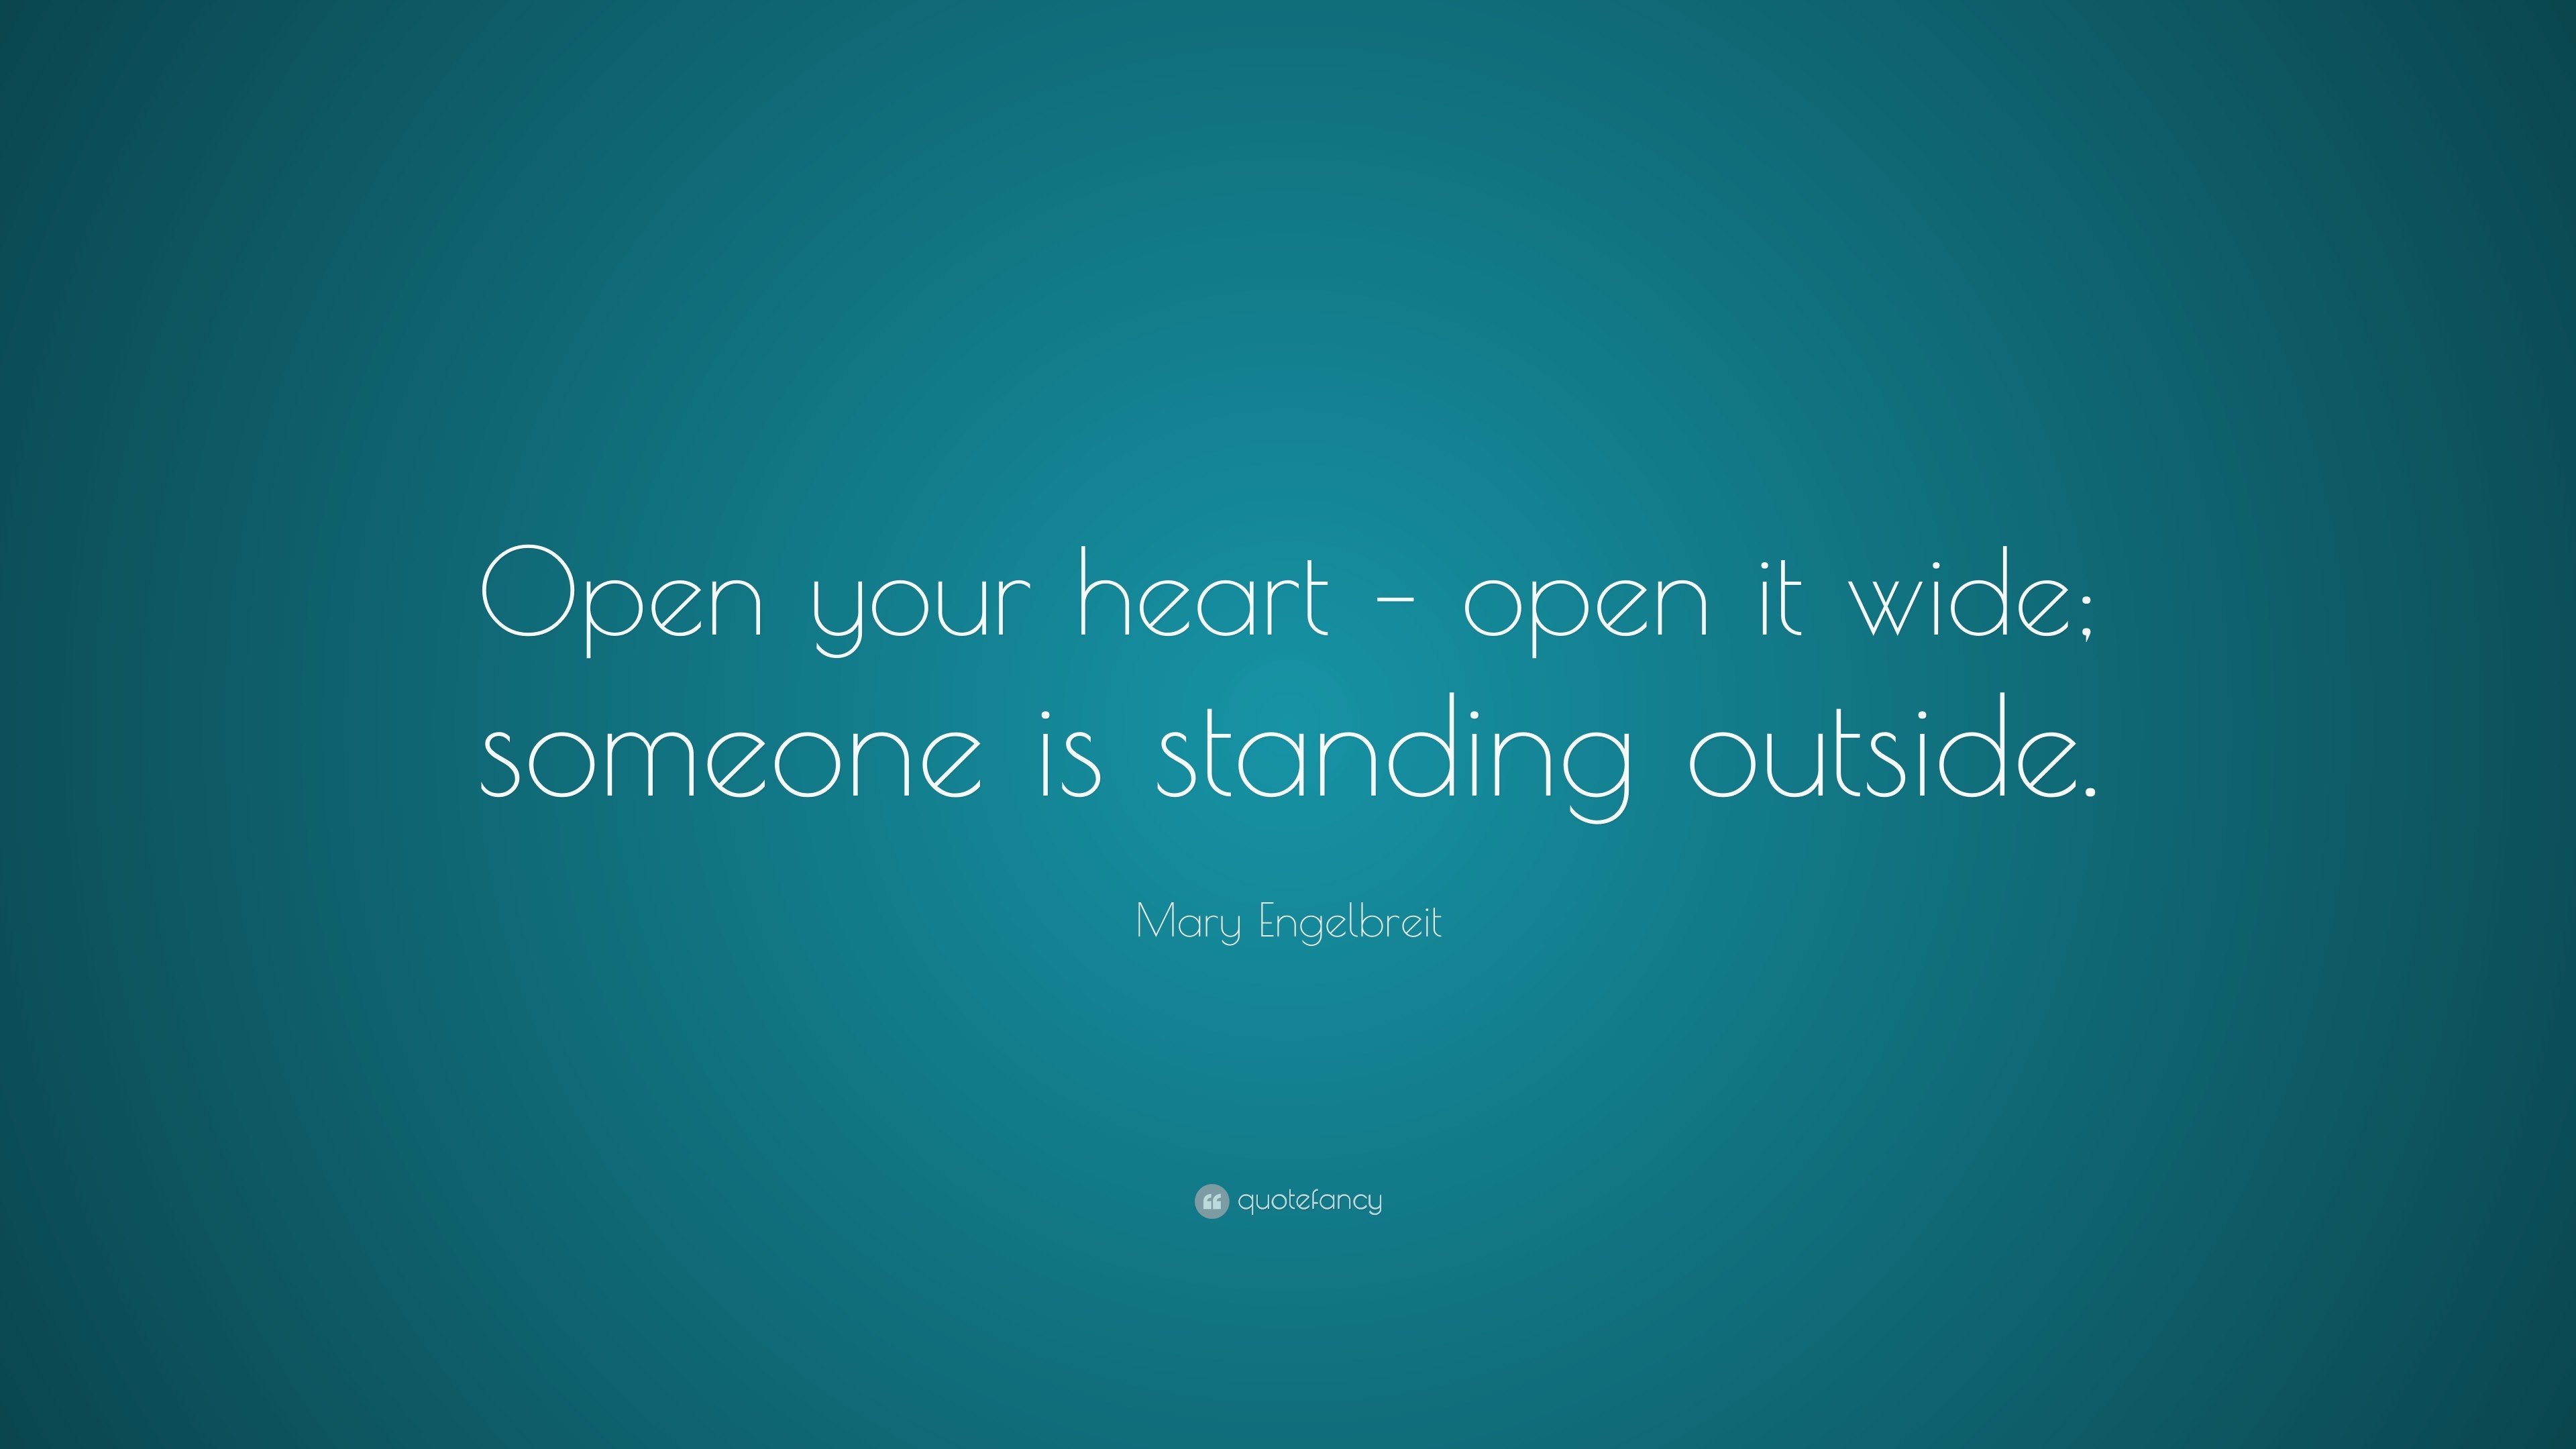 3840x2160 Mary Engelbreit Quote: “Open your heart – open it wide; someone is standing